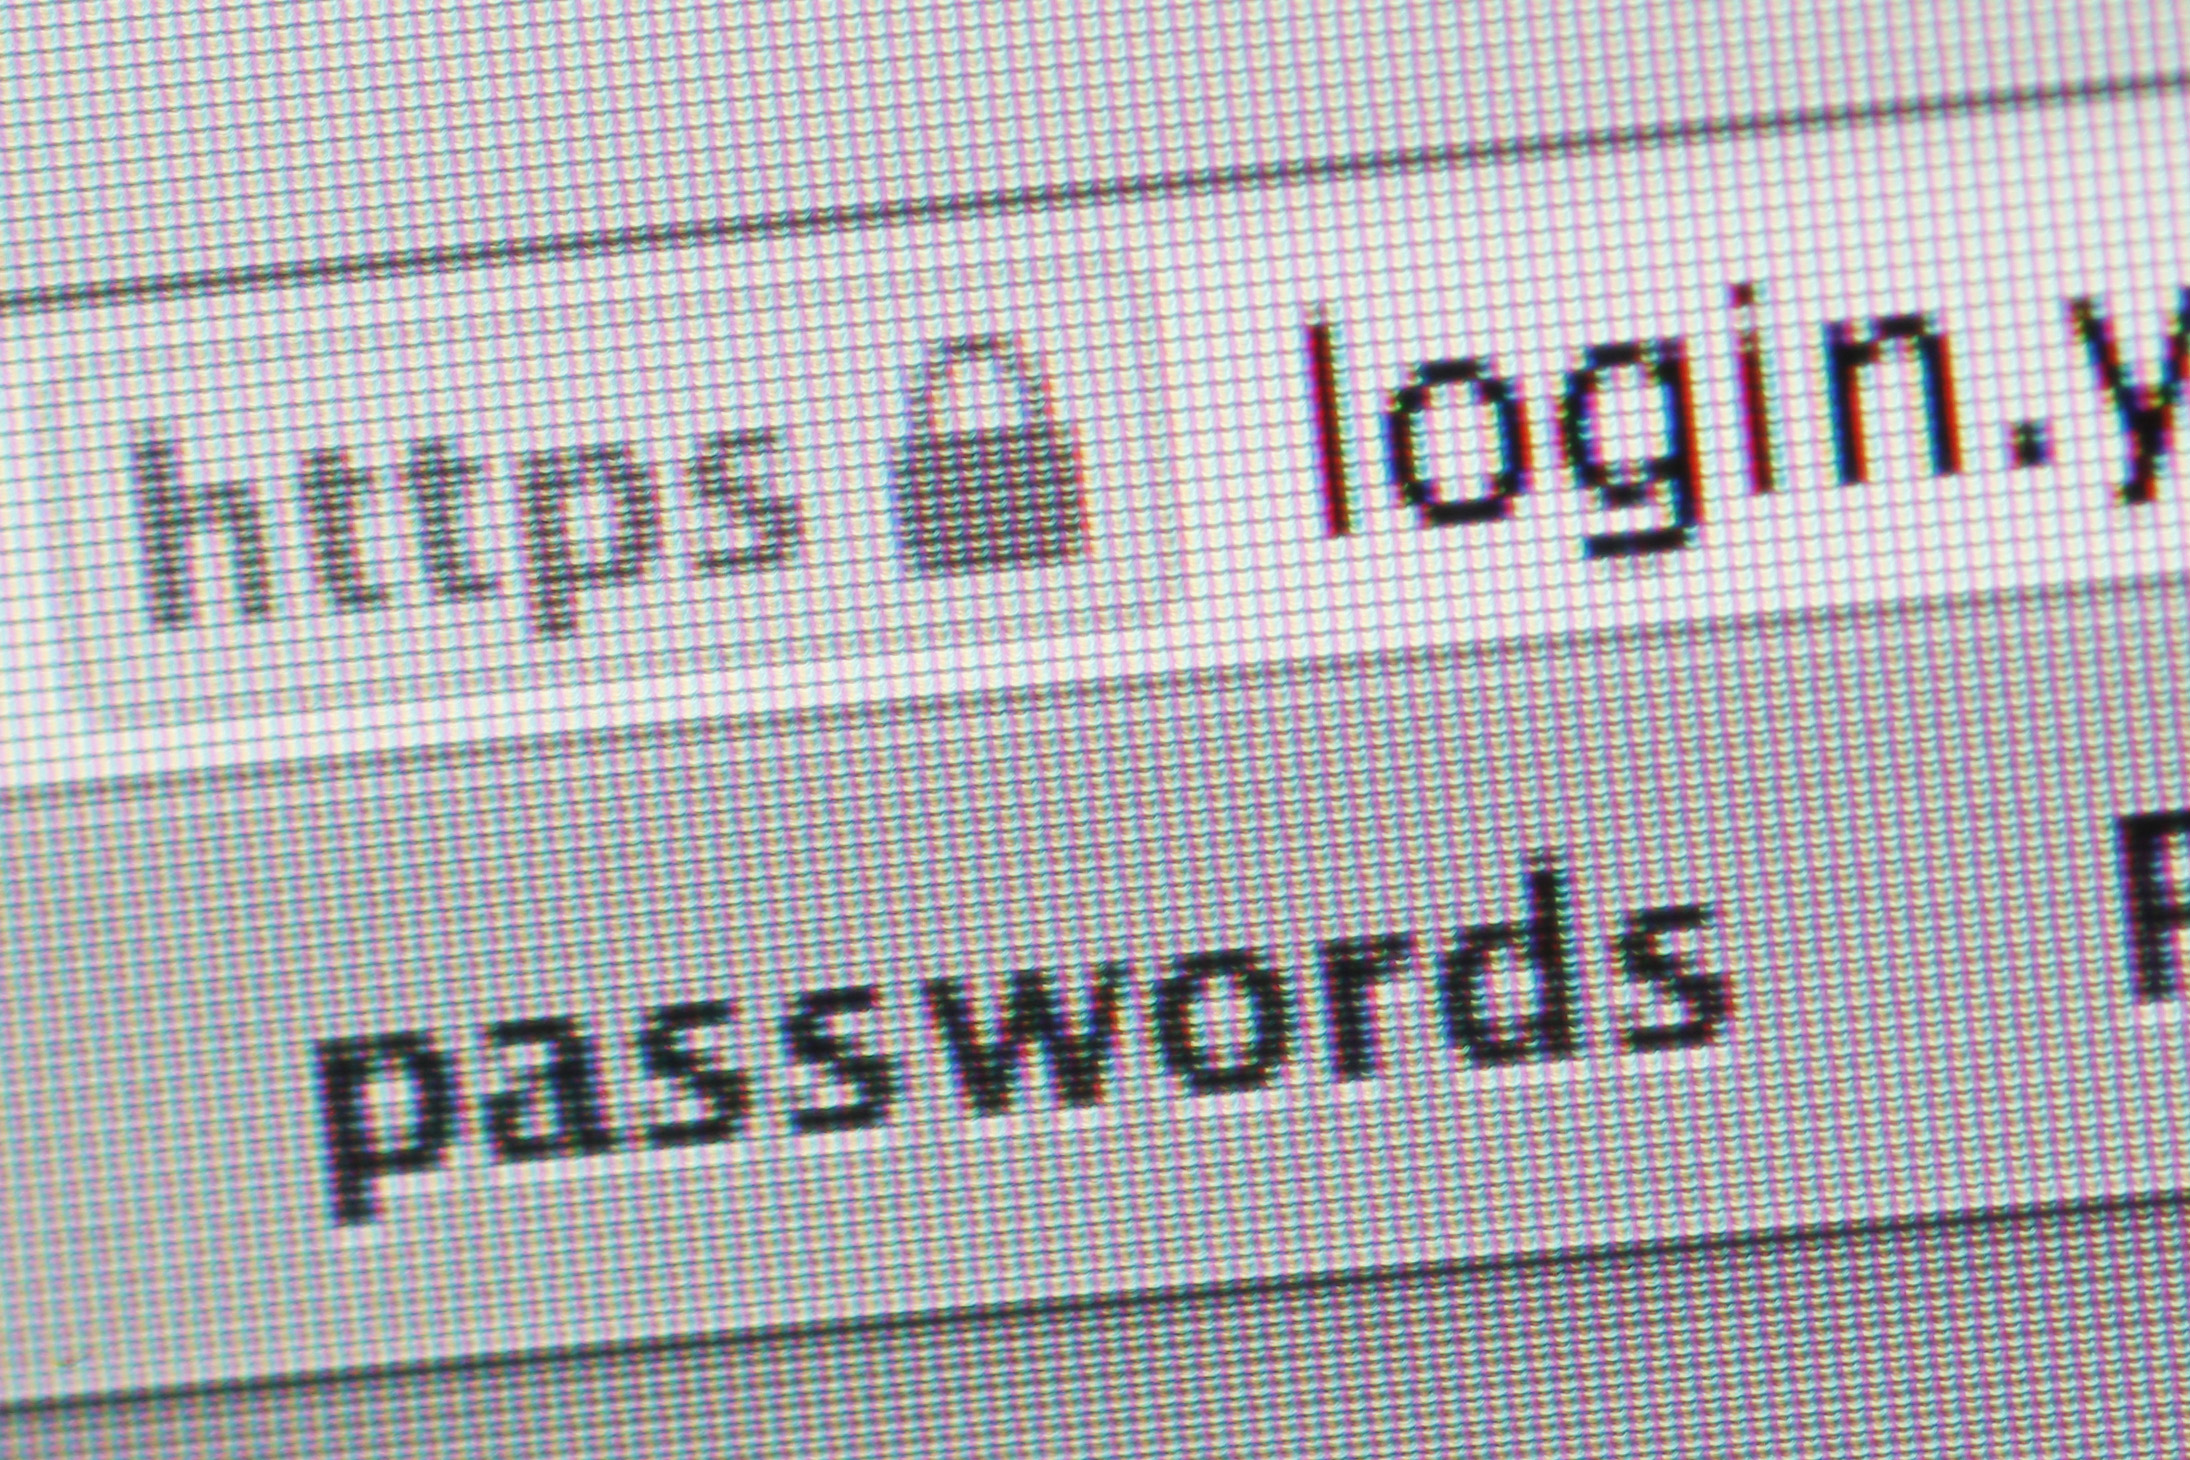 Symbol of a secure website, https, on a computer screen on August 08, 2014, in Berlin, Germany. (Thomas Trutschel—Photothek via Getty Images)